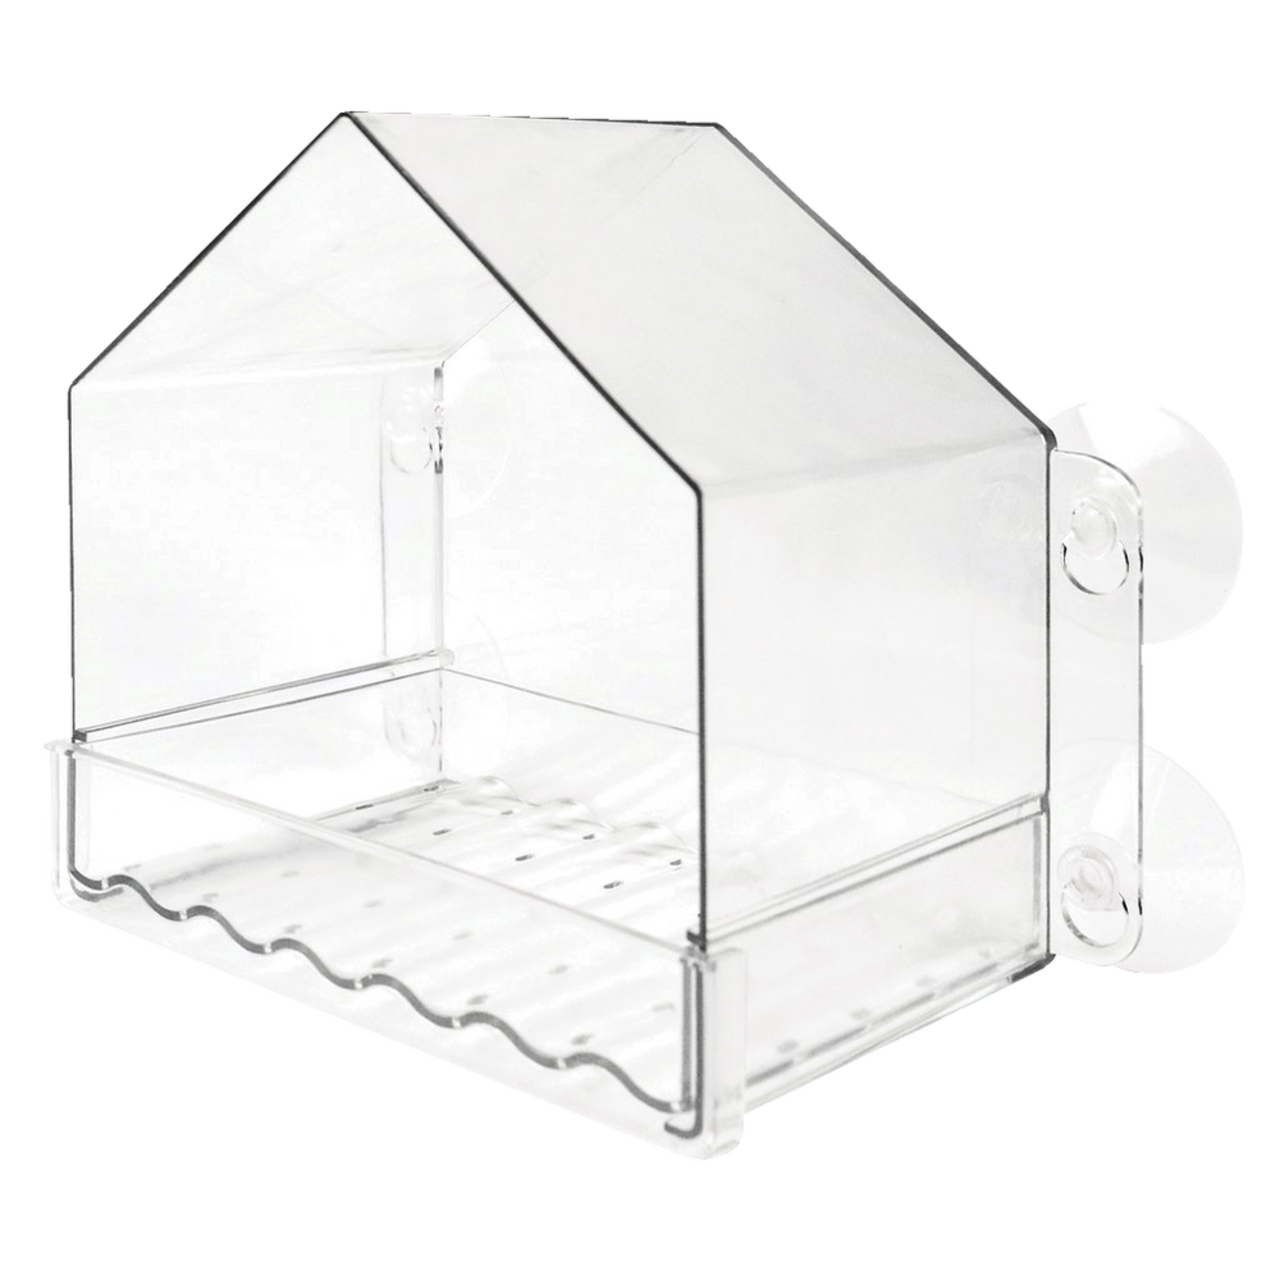 https://media-www.canadiantire.ca/product/living/pet-care/wild-bird-care/1426596/clear-view-window-feeder-2d2898ed-75cf-4168-af70-3307274837e4.png?imdensity=1&imwidth=640&impolicy=mZoom